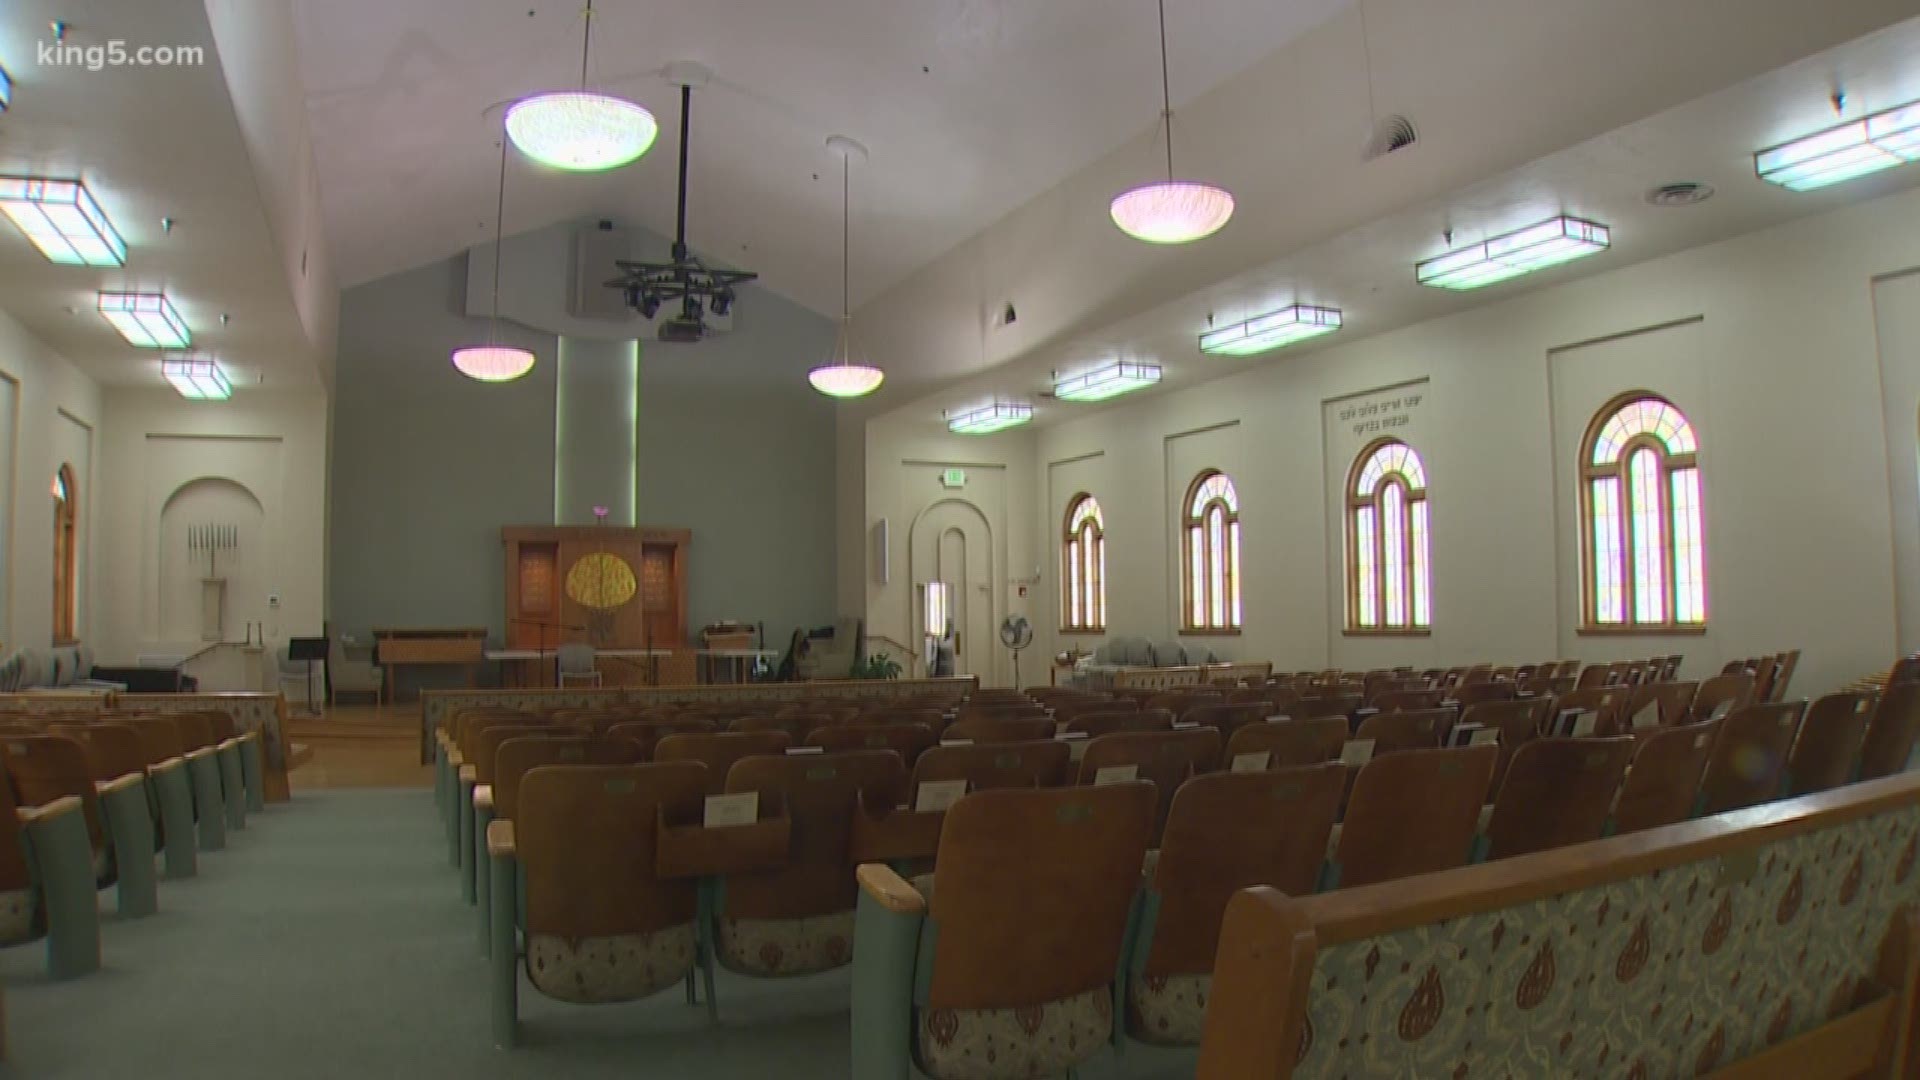 A mother from Guatemala has taken sanctuary at an Olympia synagogue with her son to avoid possible deportation. KING 5's Michael Crowe reports.